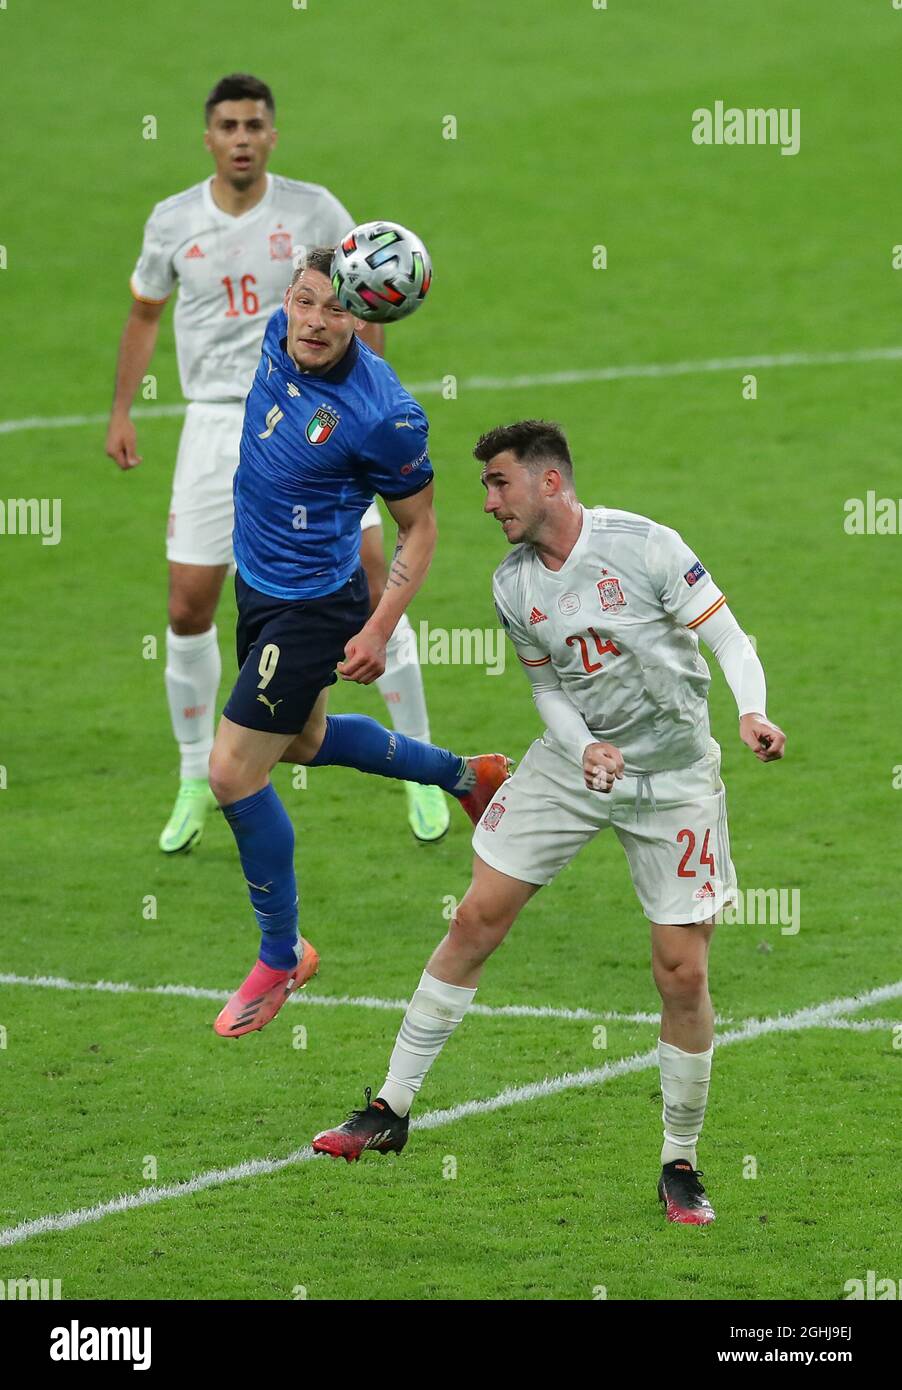 London, England, 6th July 2021. Aymeric Laporte of Spain challenged by Andrea Belotti of Italy during the UEFA Euro 2020 match at Wembley Stadium, London. Picture credit should read: David Klein / Sportimage via PA Images Stock Photo